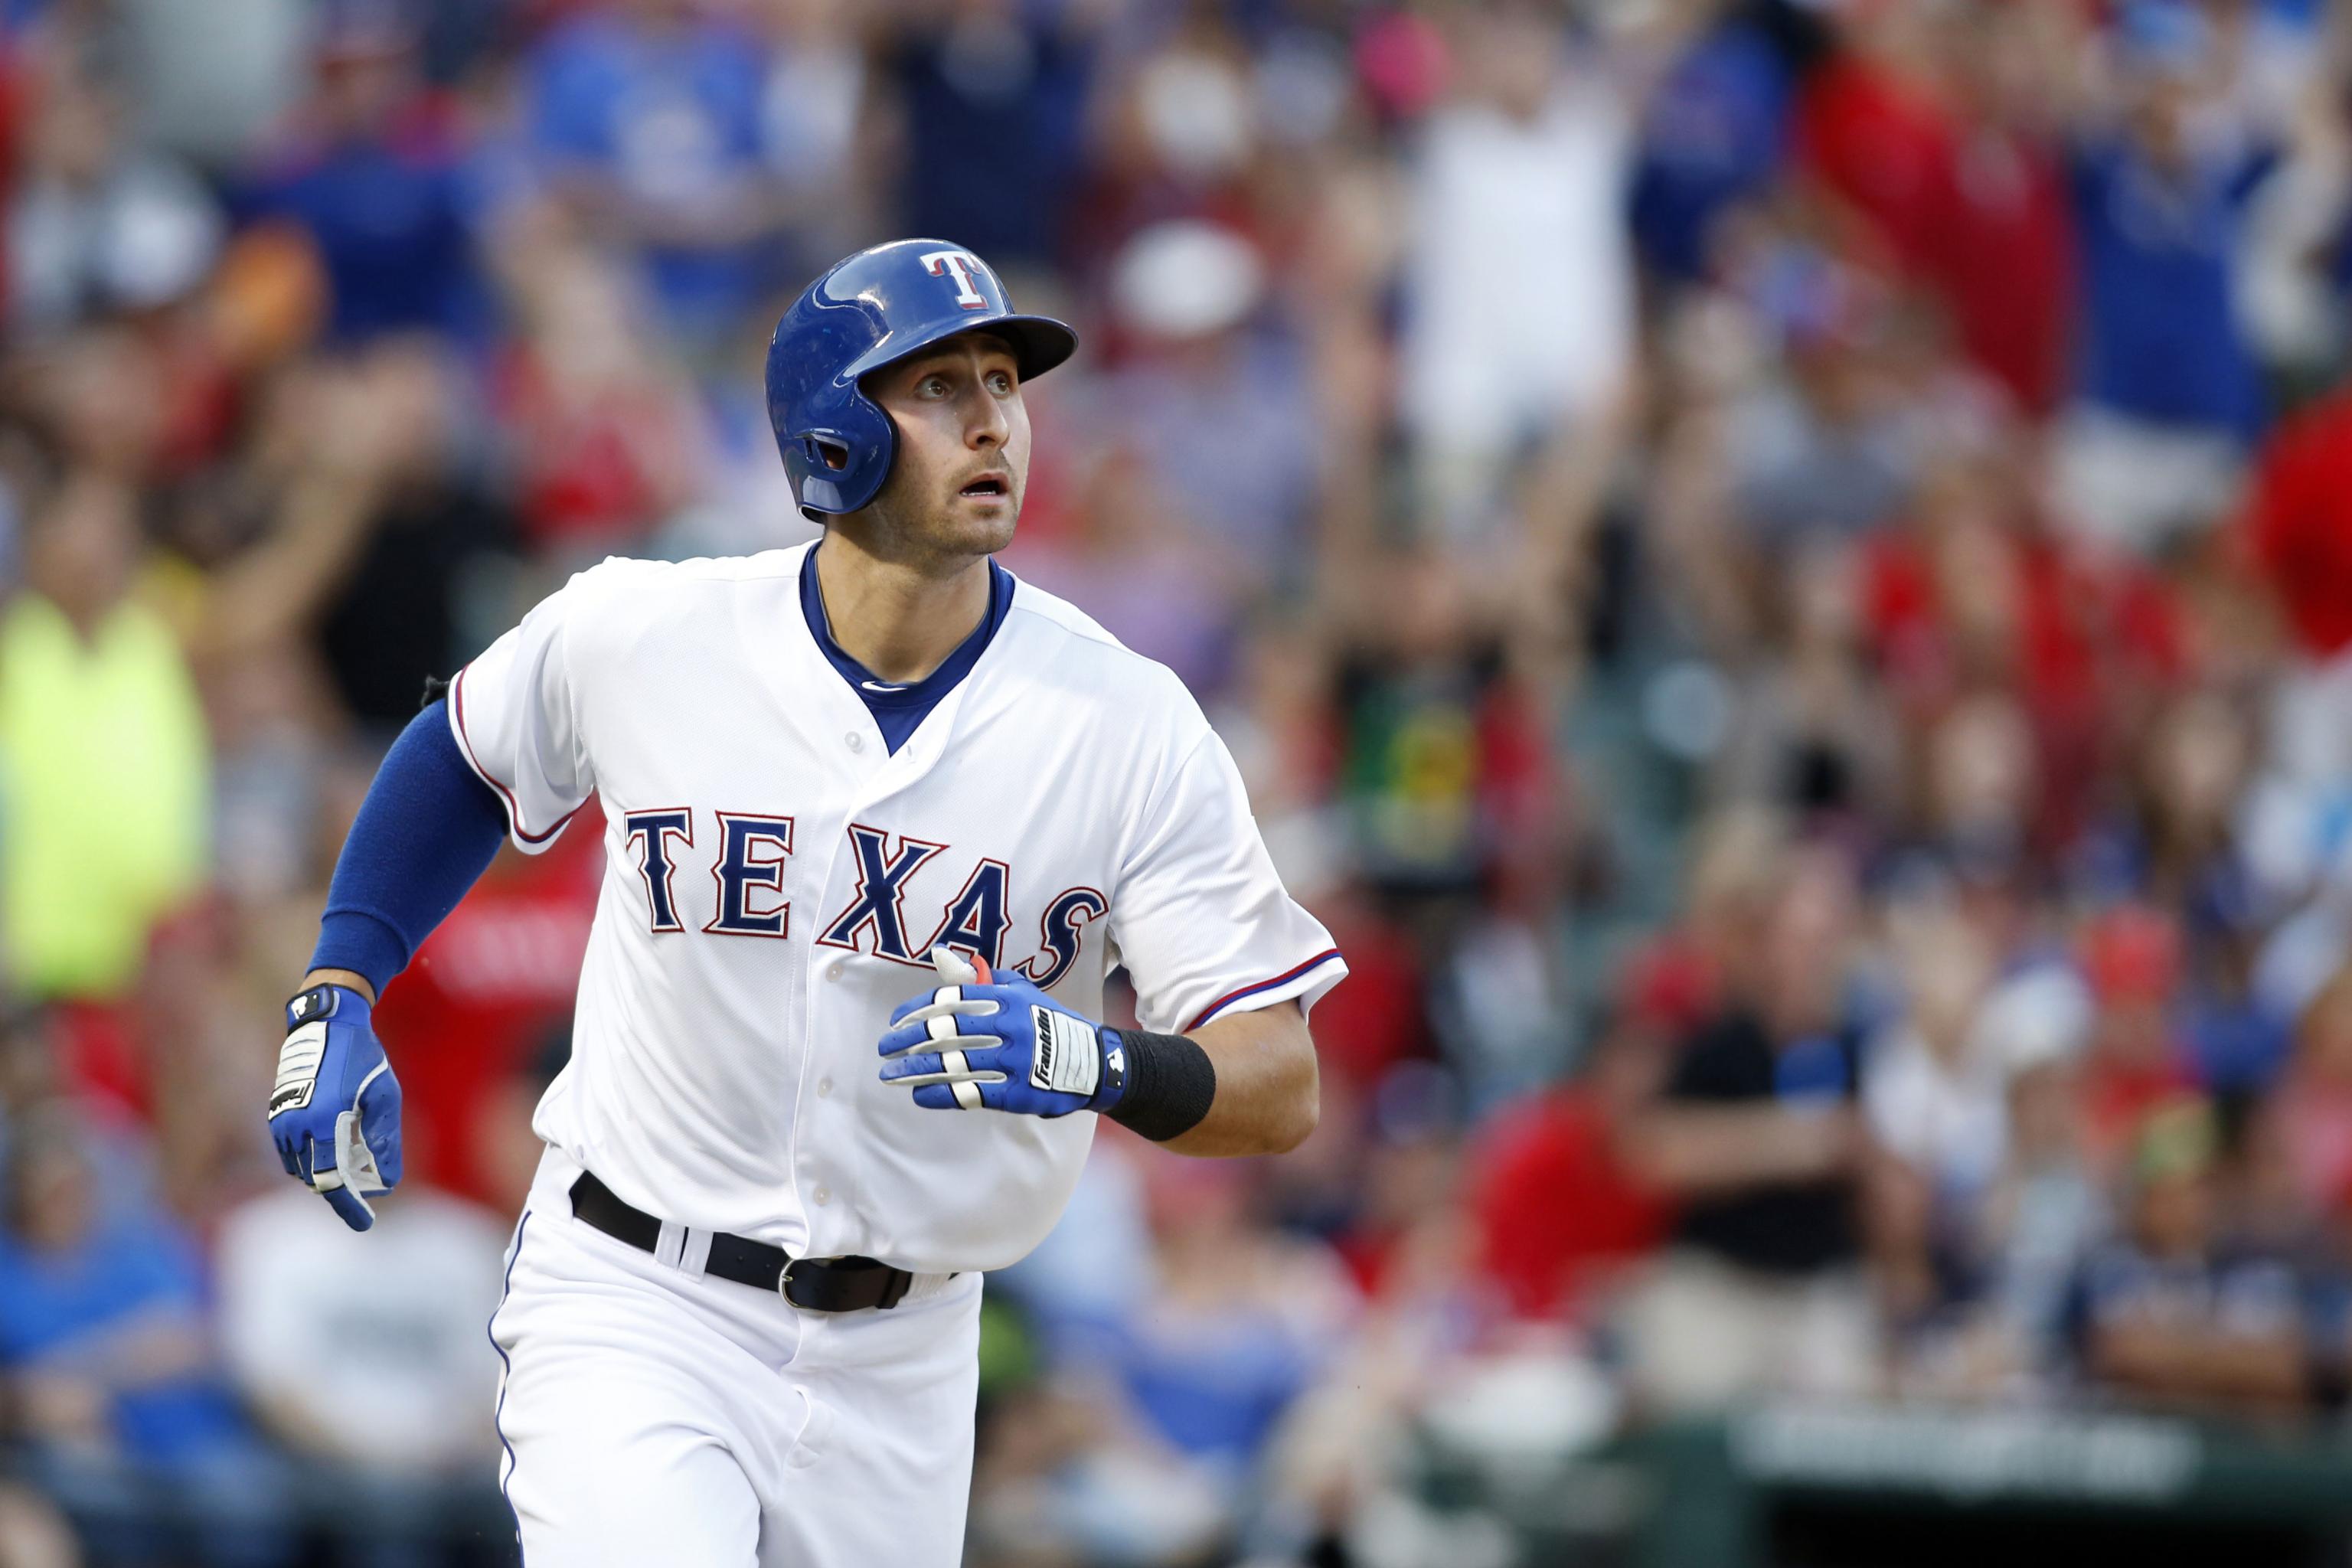 Texas Rangers: Why does everyone hate Joey Gallo?